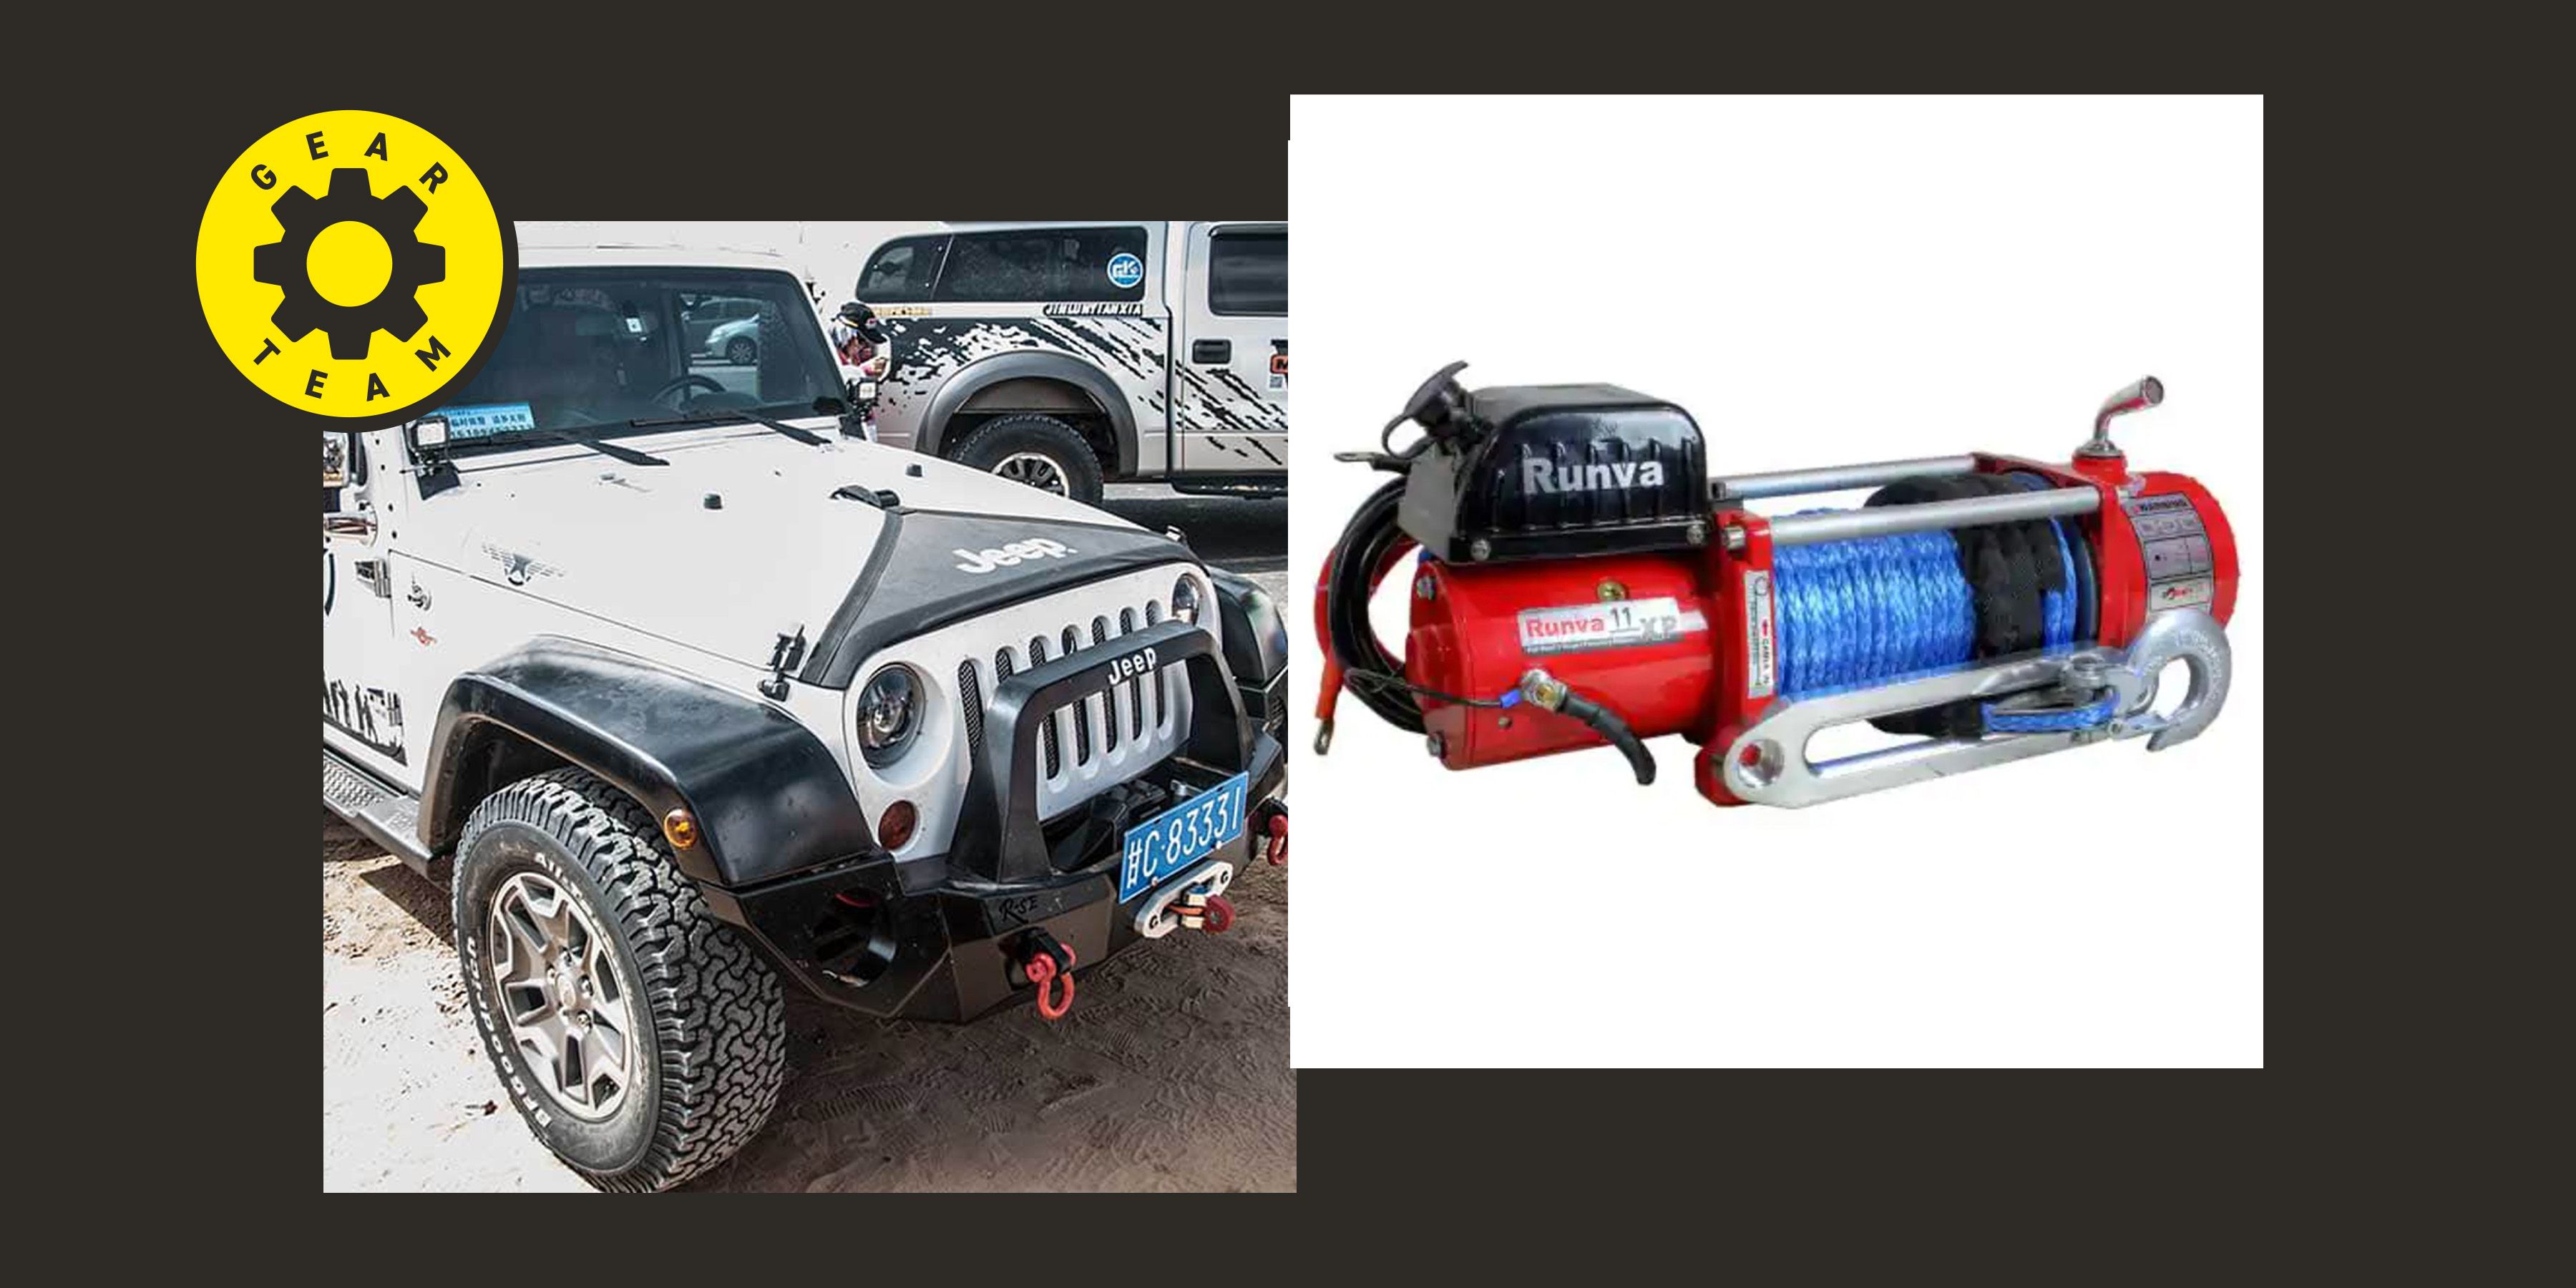 Deal Alert: Huge Winch Sale Going on This Week Only at Home Depot